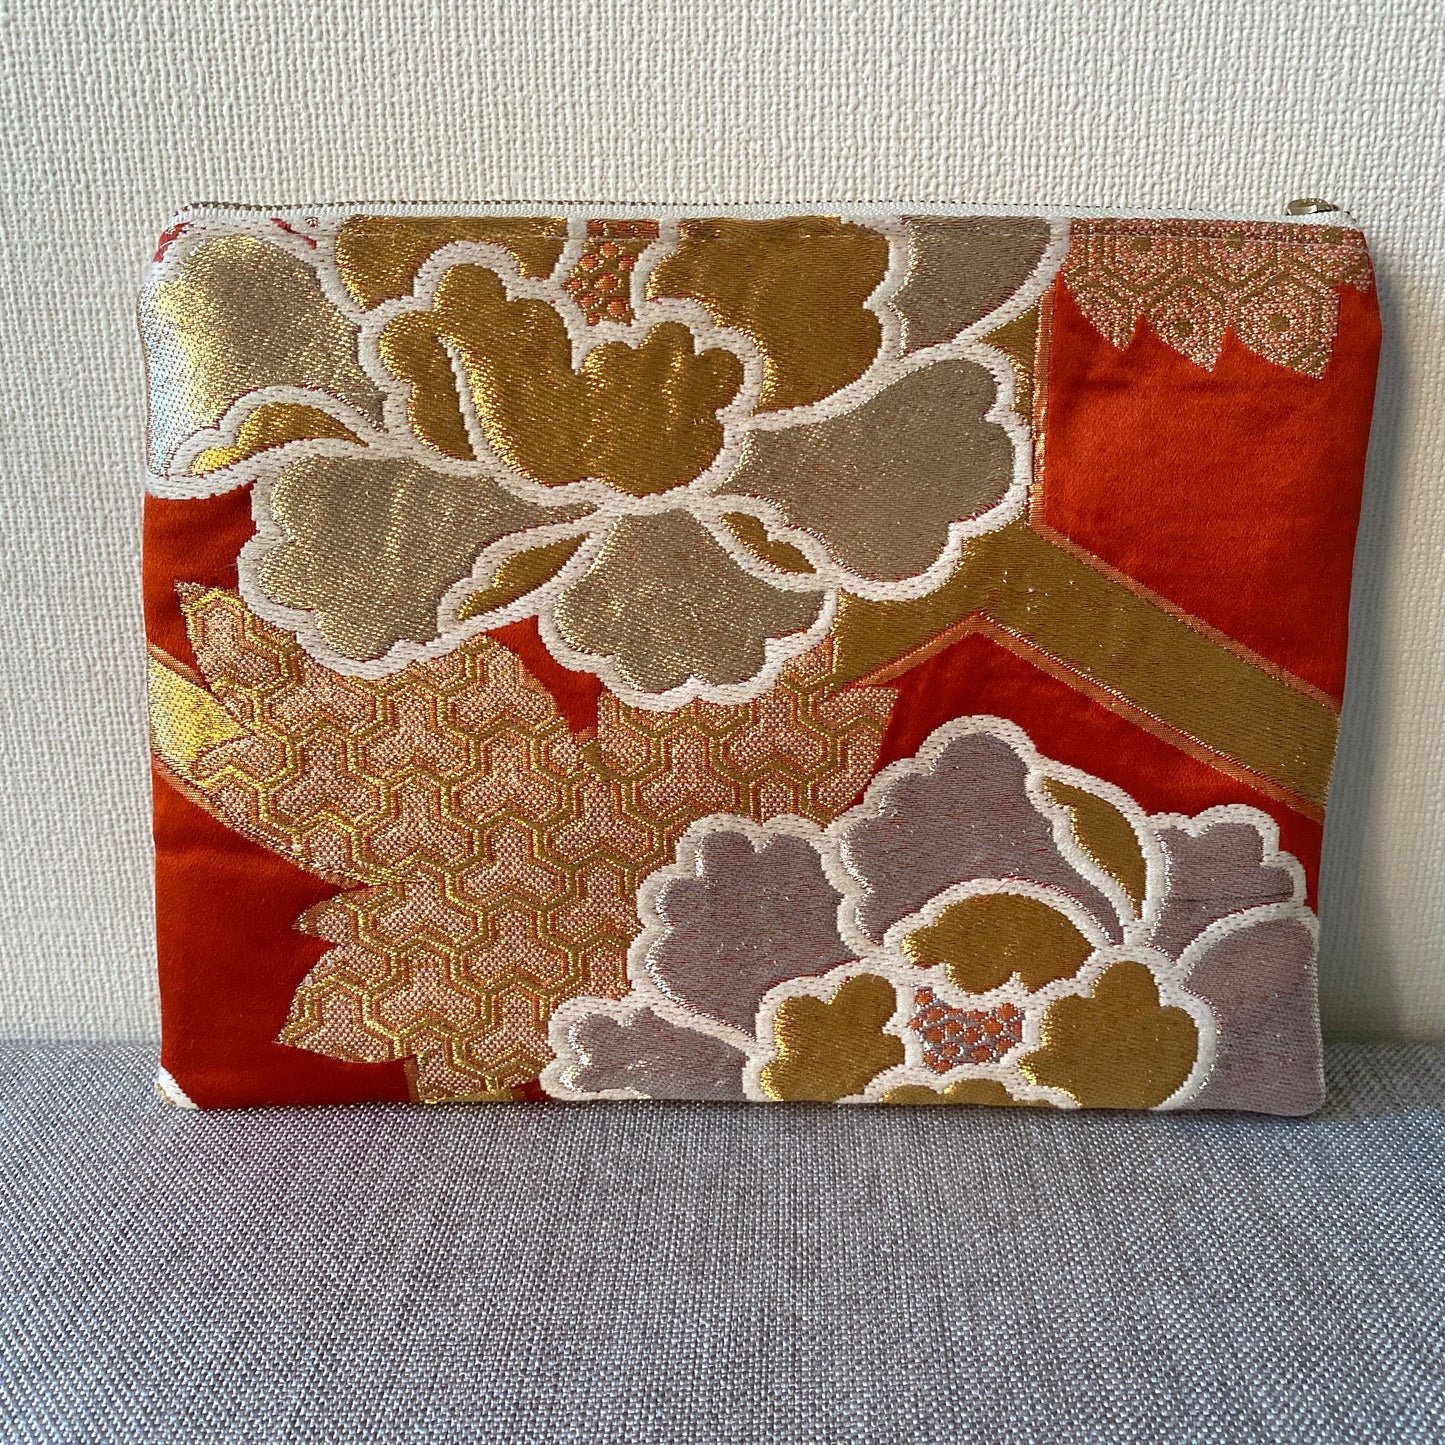 Flat silk Obi pouch, Medium size, Handcrafted, Upcycled, #3004